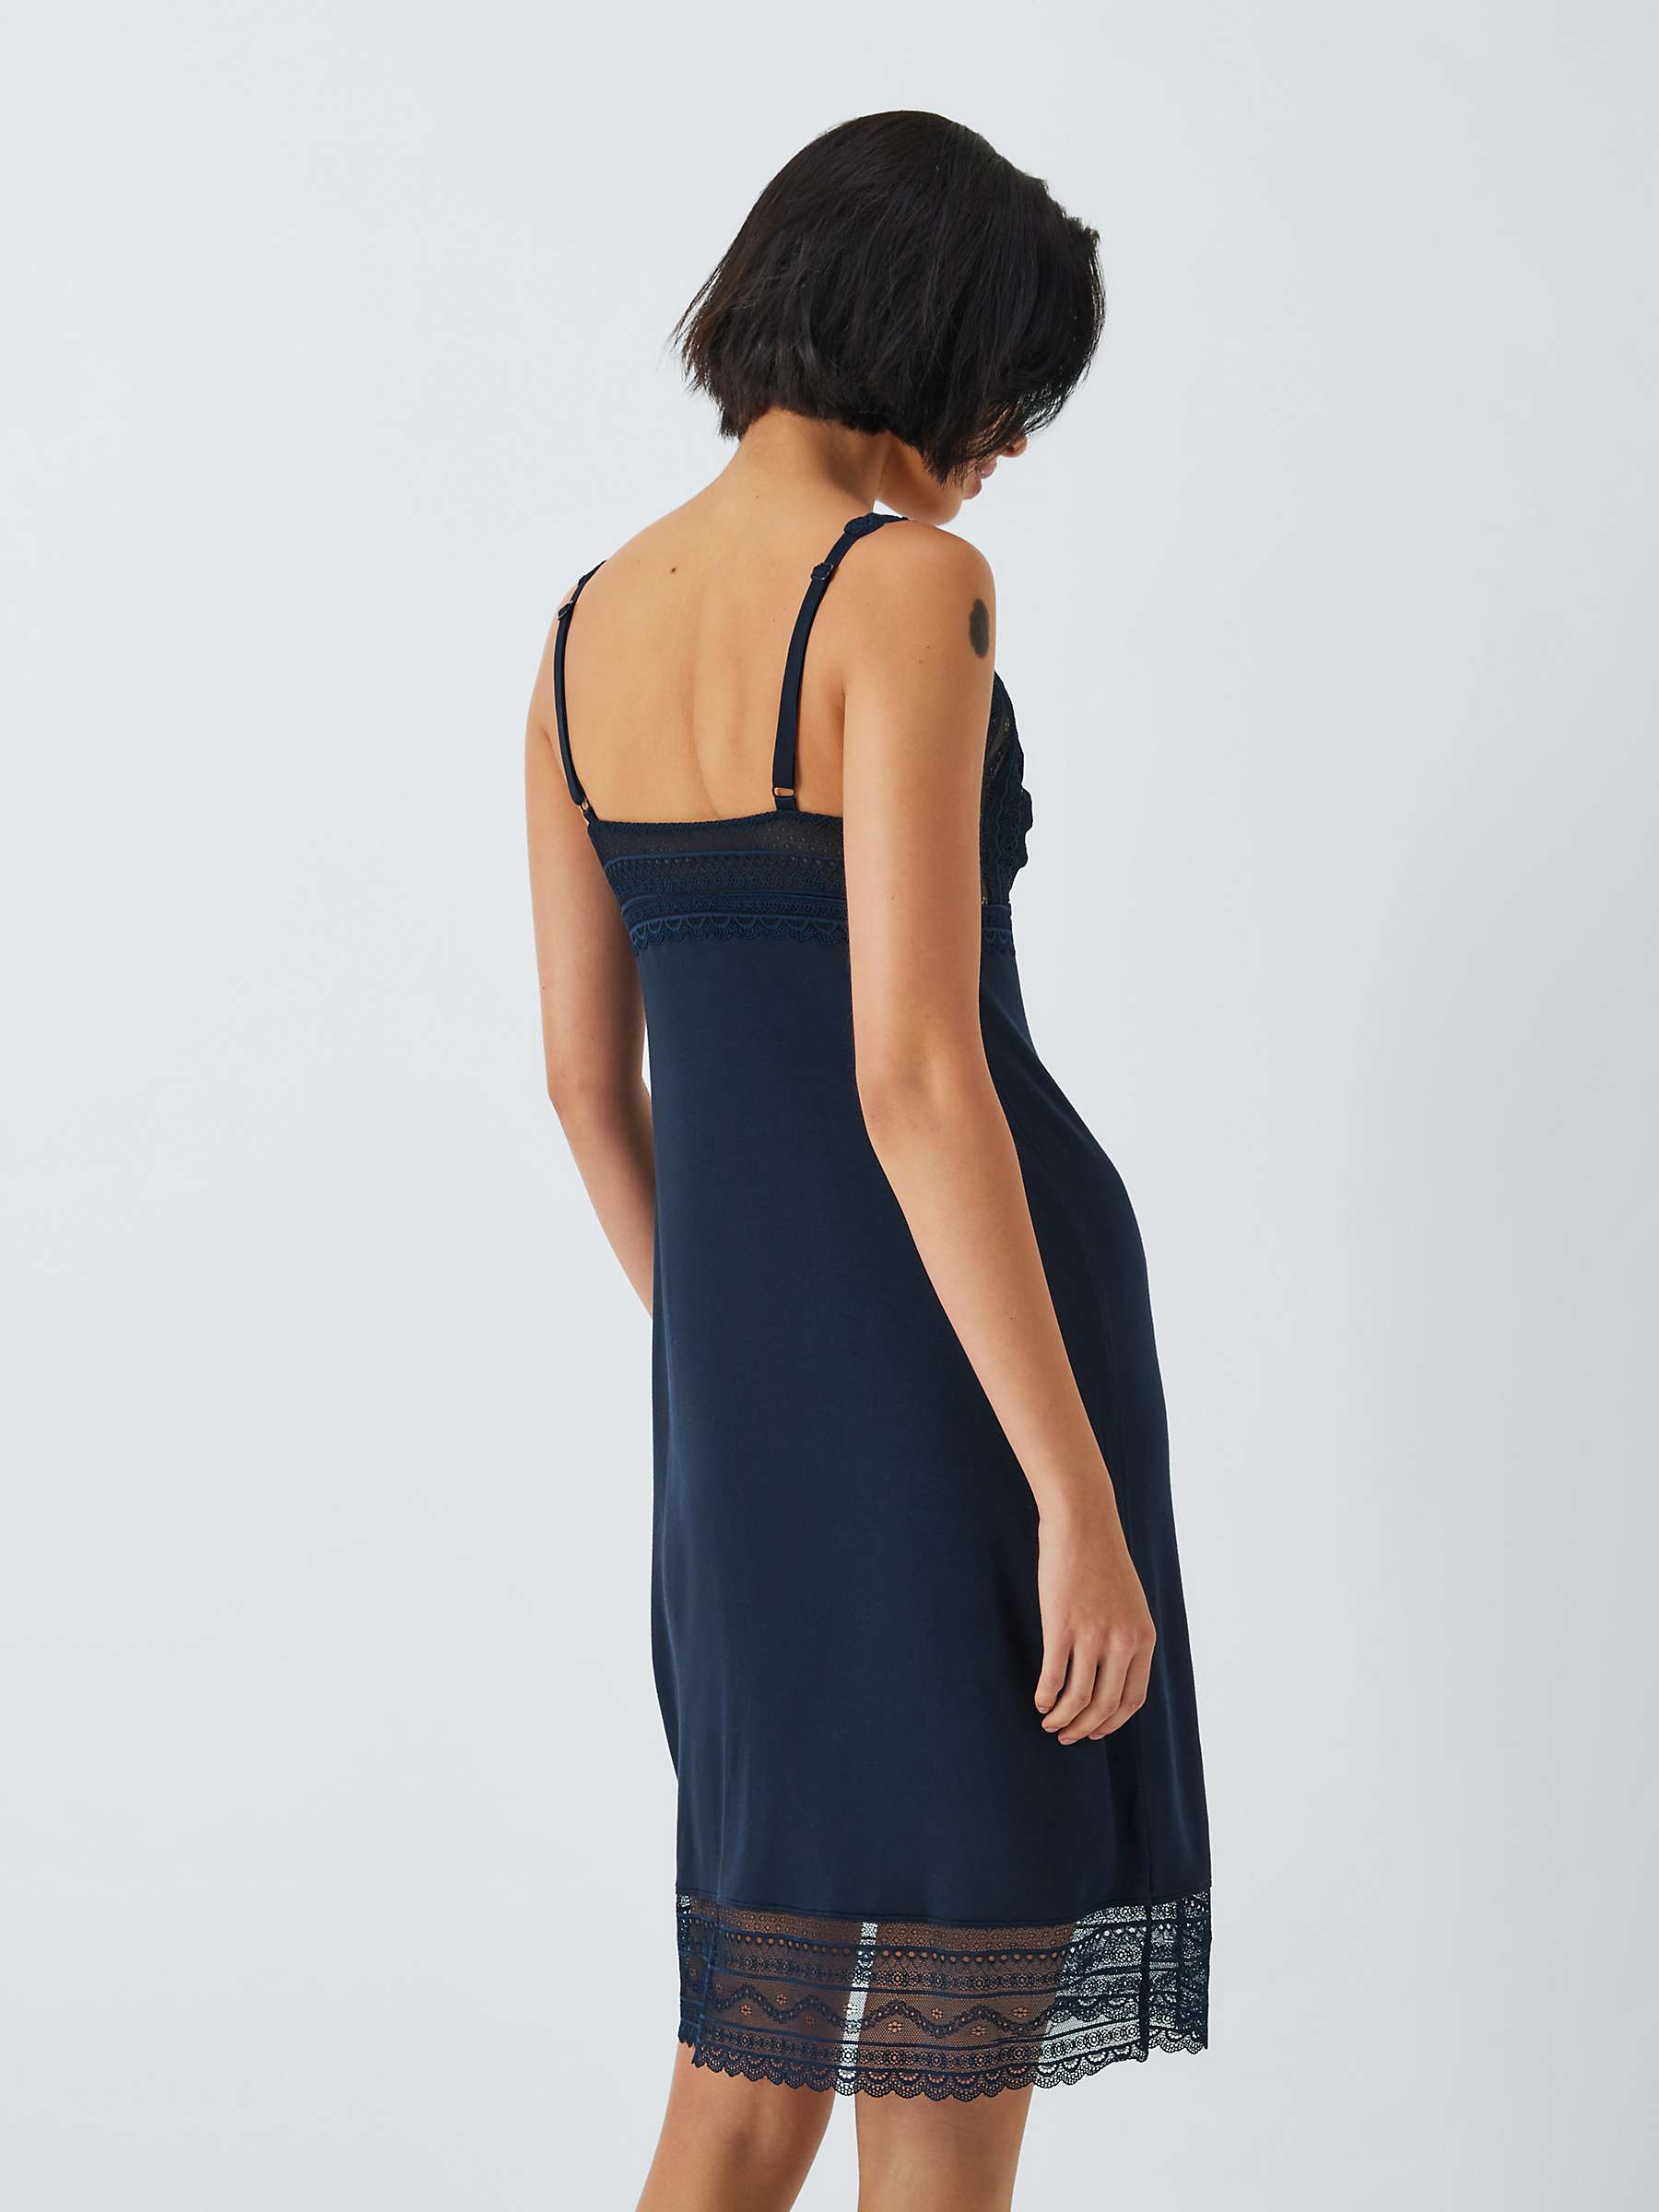 Buy John Lewis Willow Lace Chemise Online at johnlewis.com